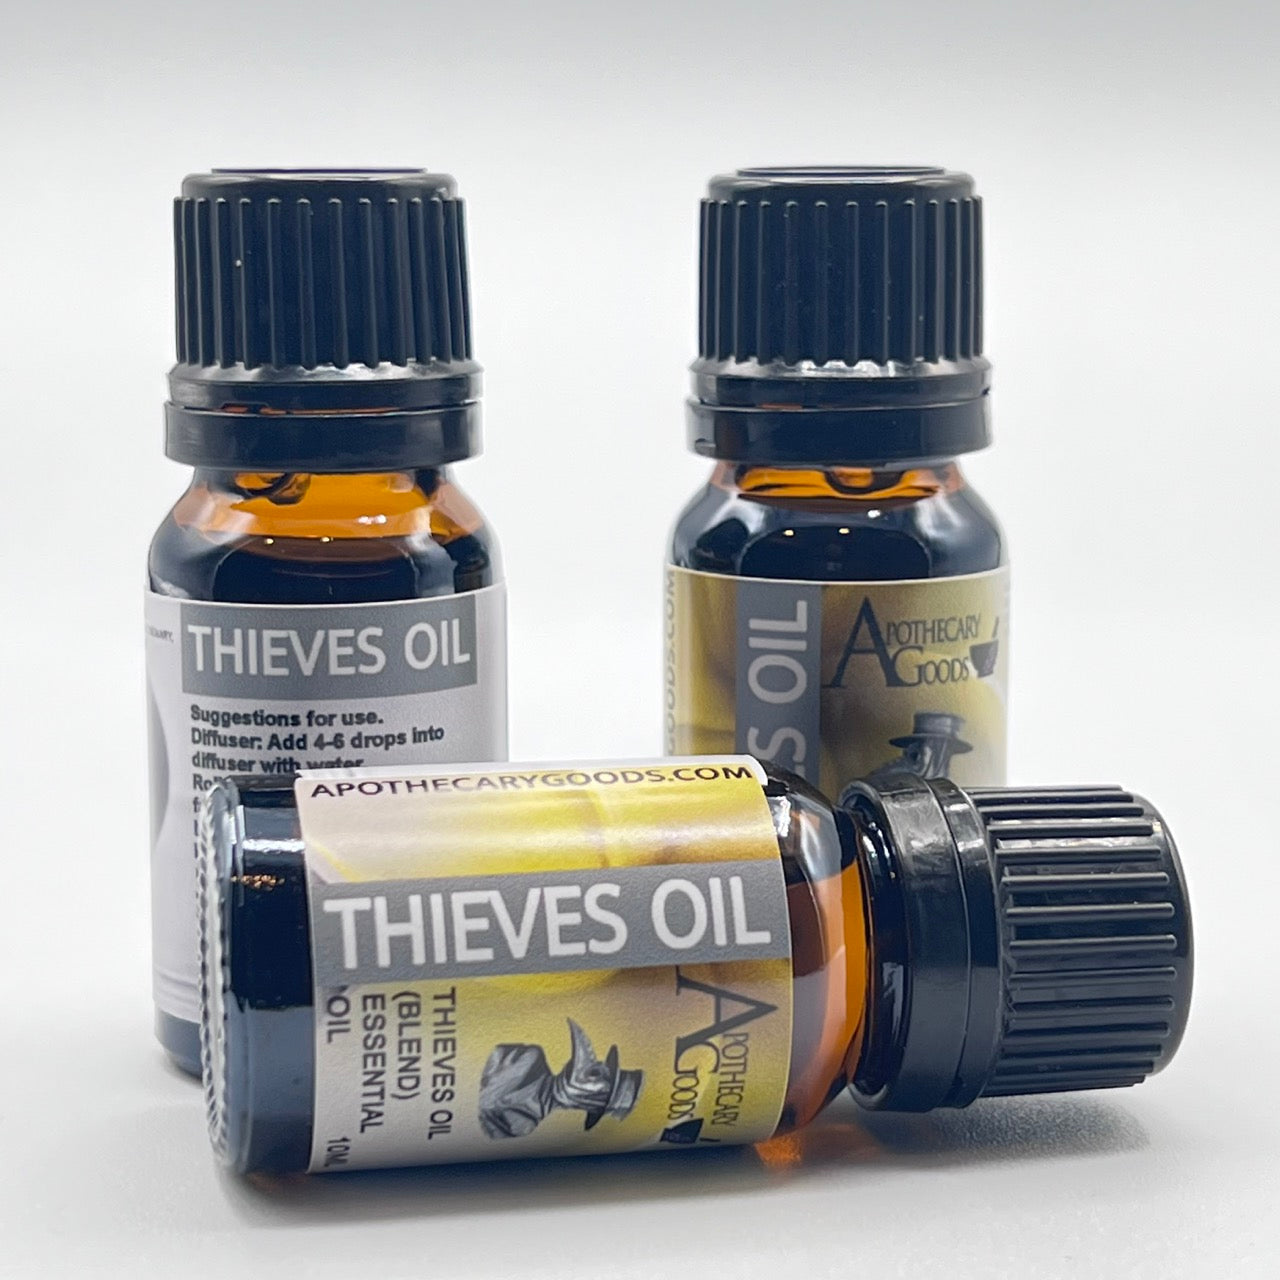 Thieves Oil Blend of Pure Essential Oils – Apothecary Goods